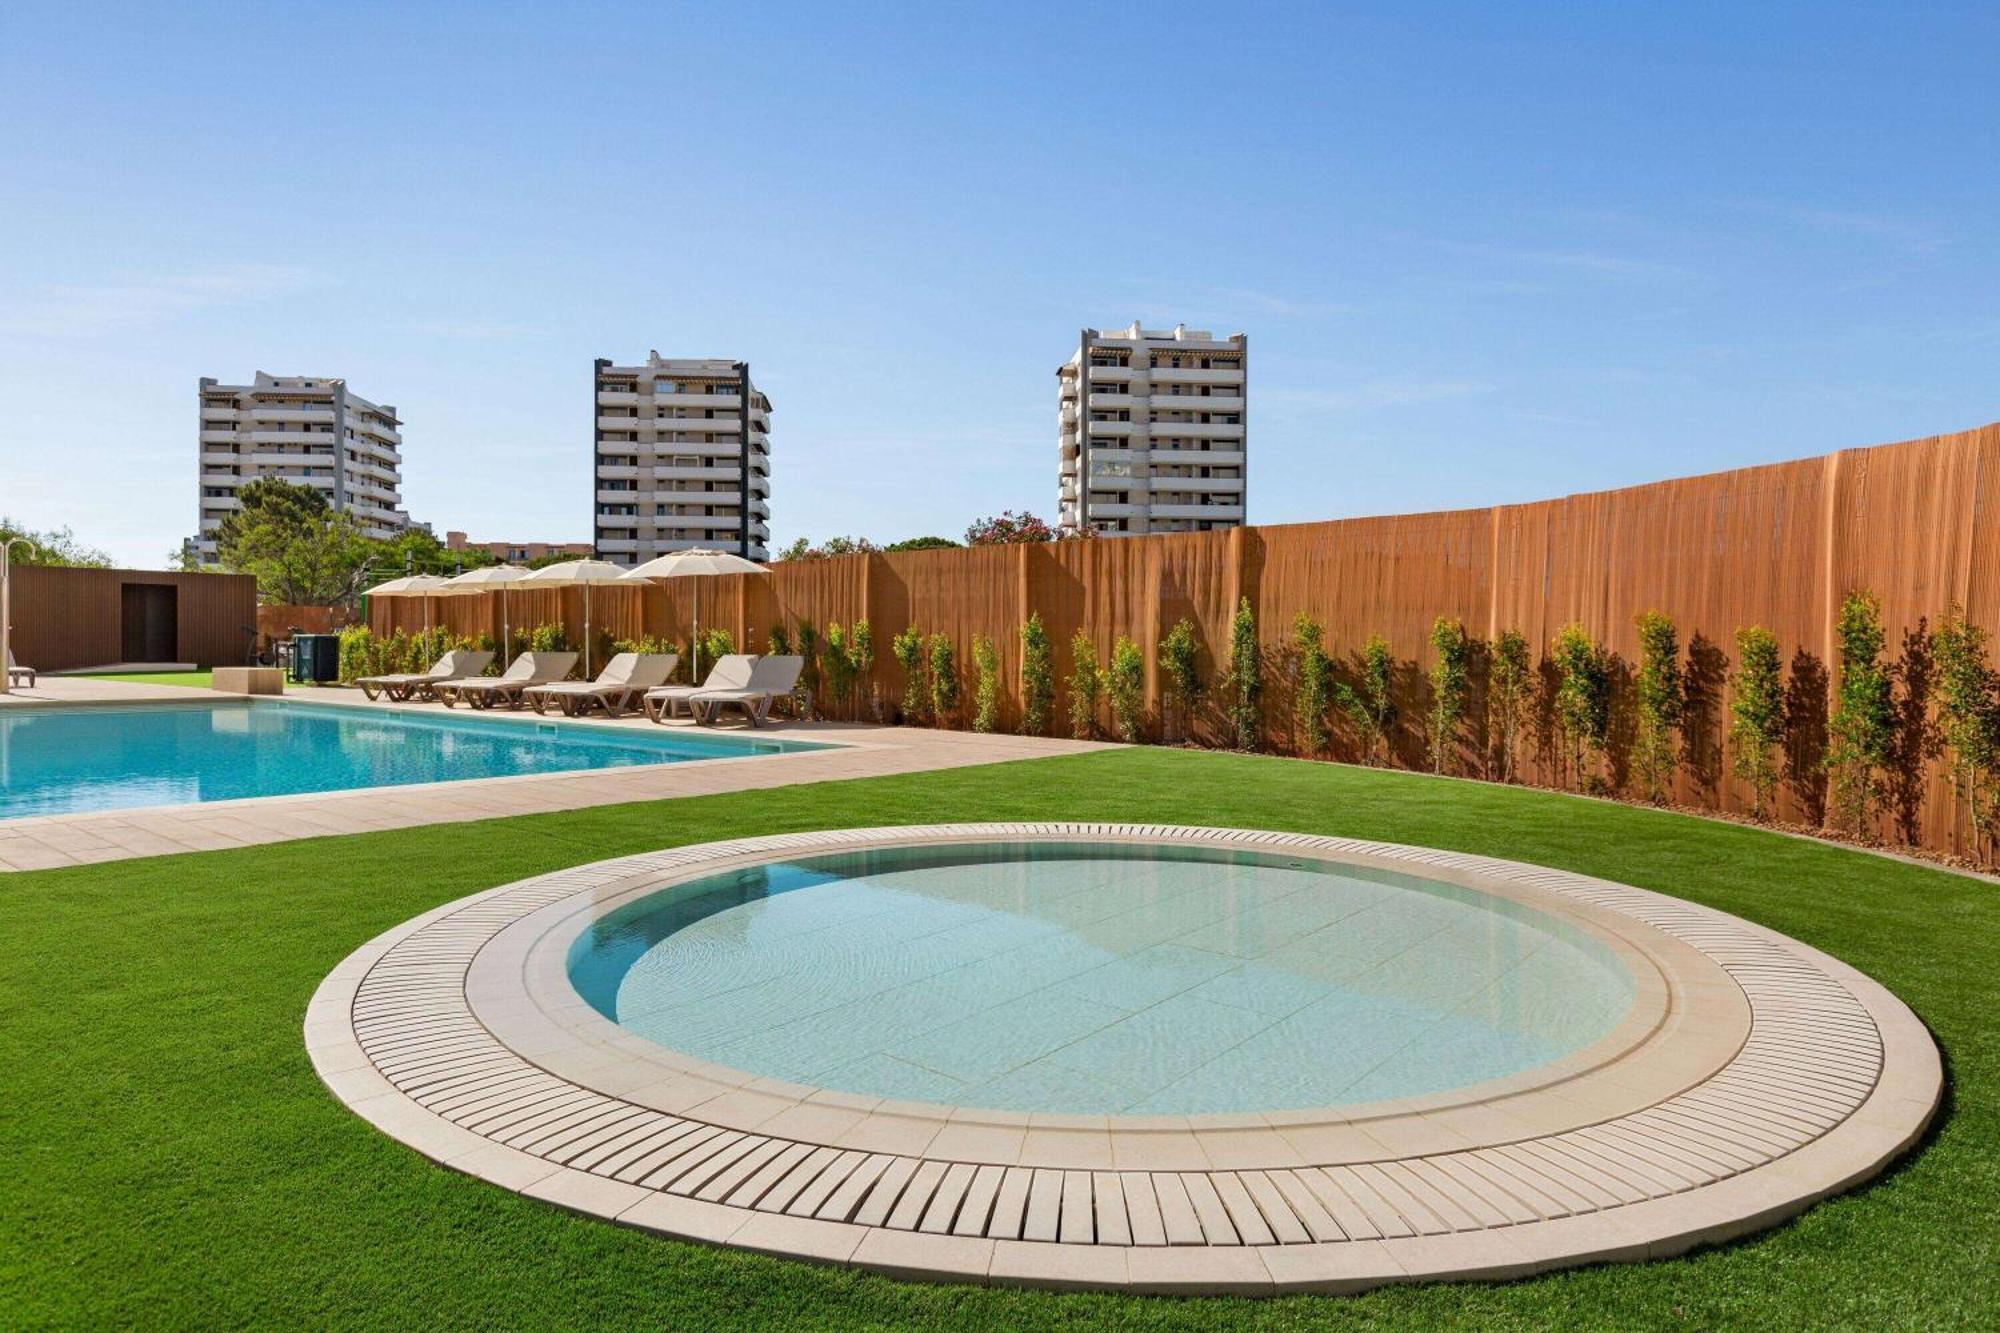 Wyndham Residences Alvor Beach (Adults Only) Exterior foto